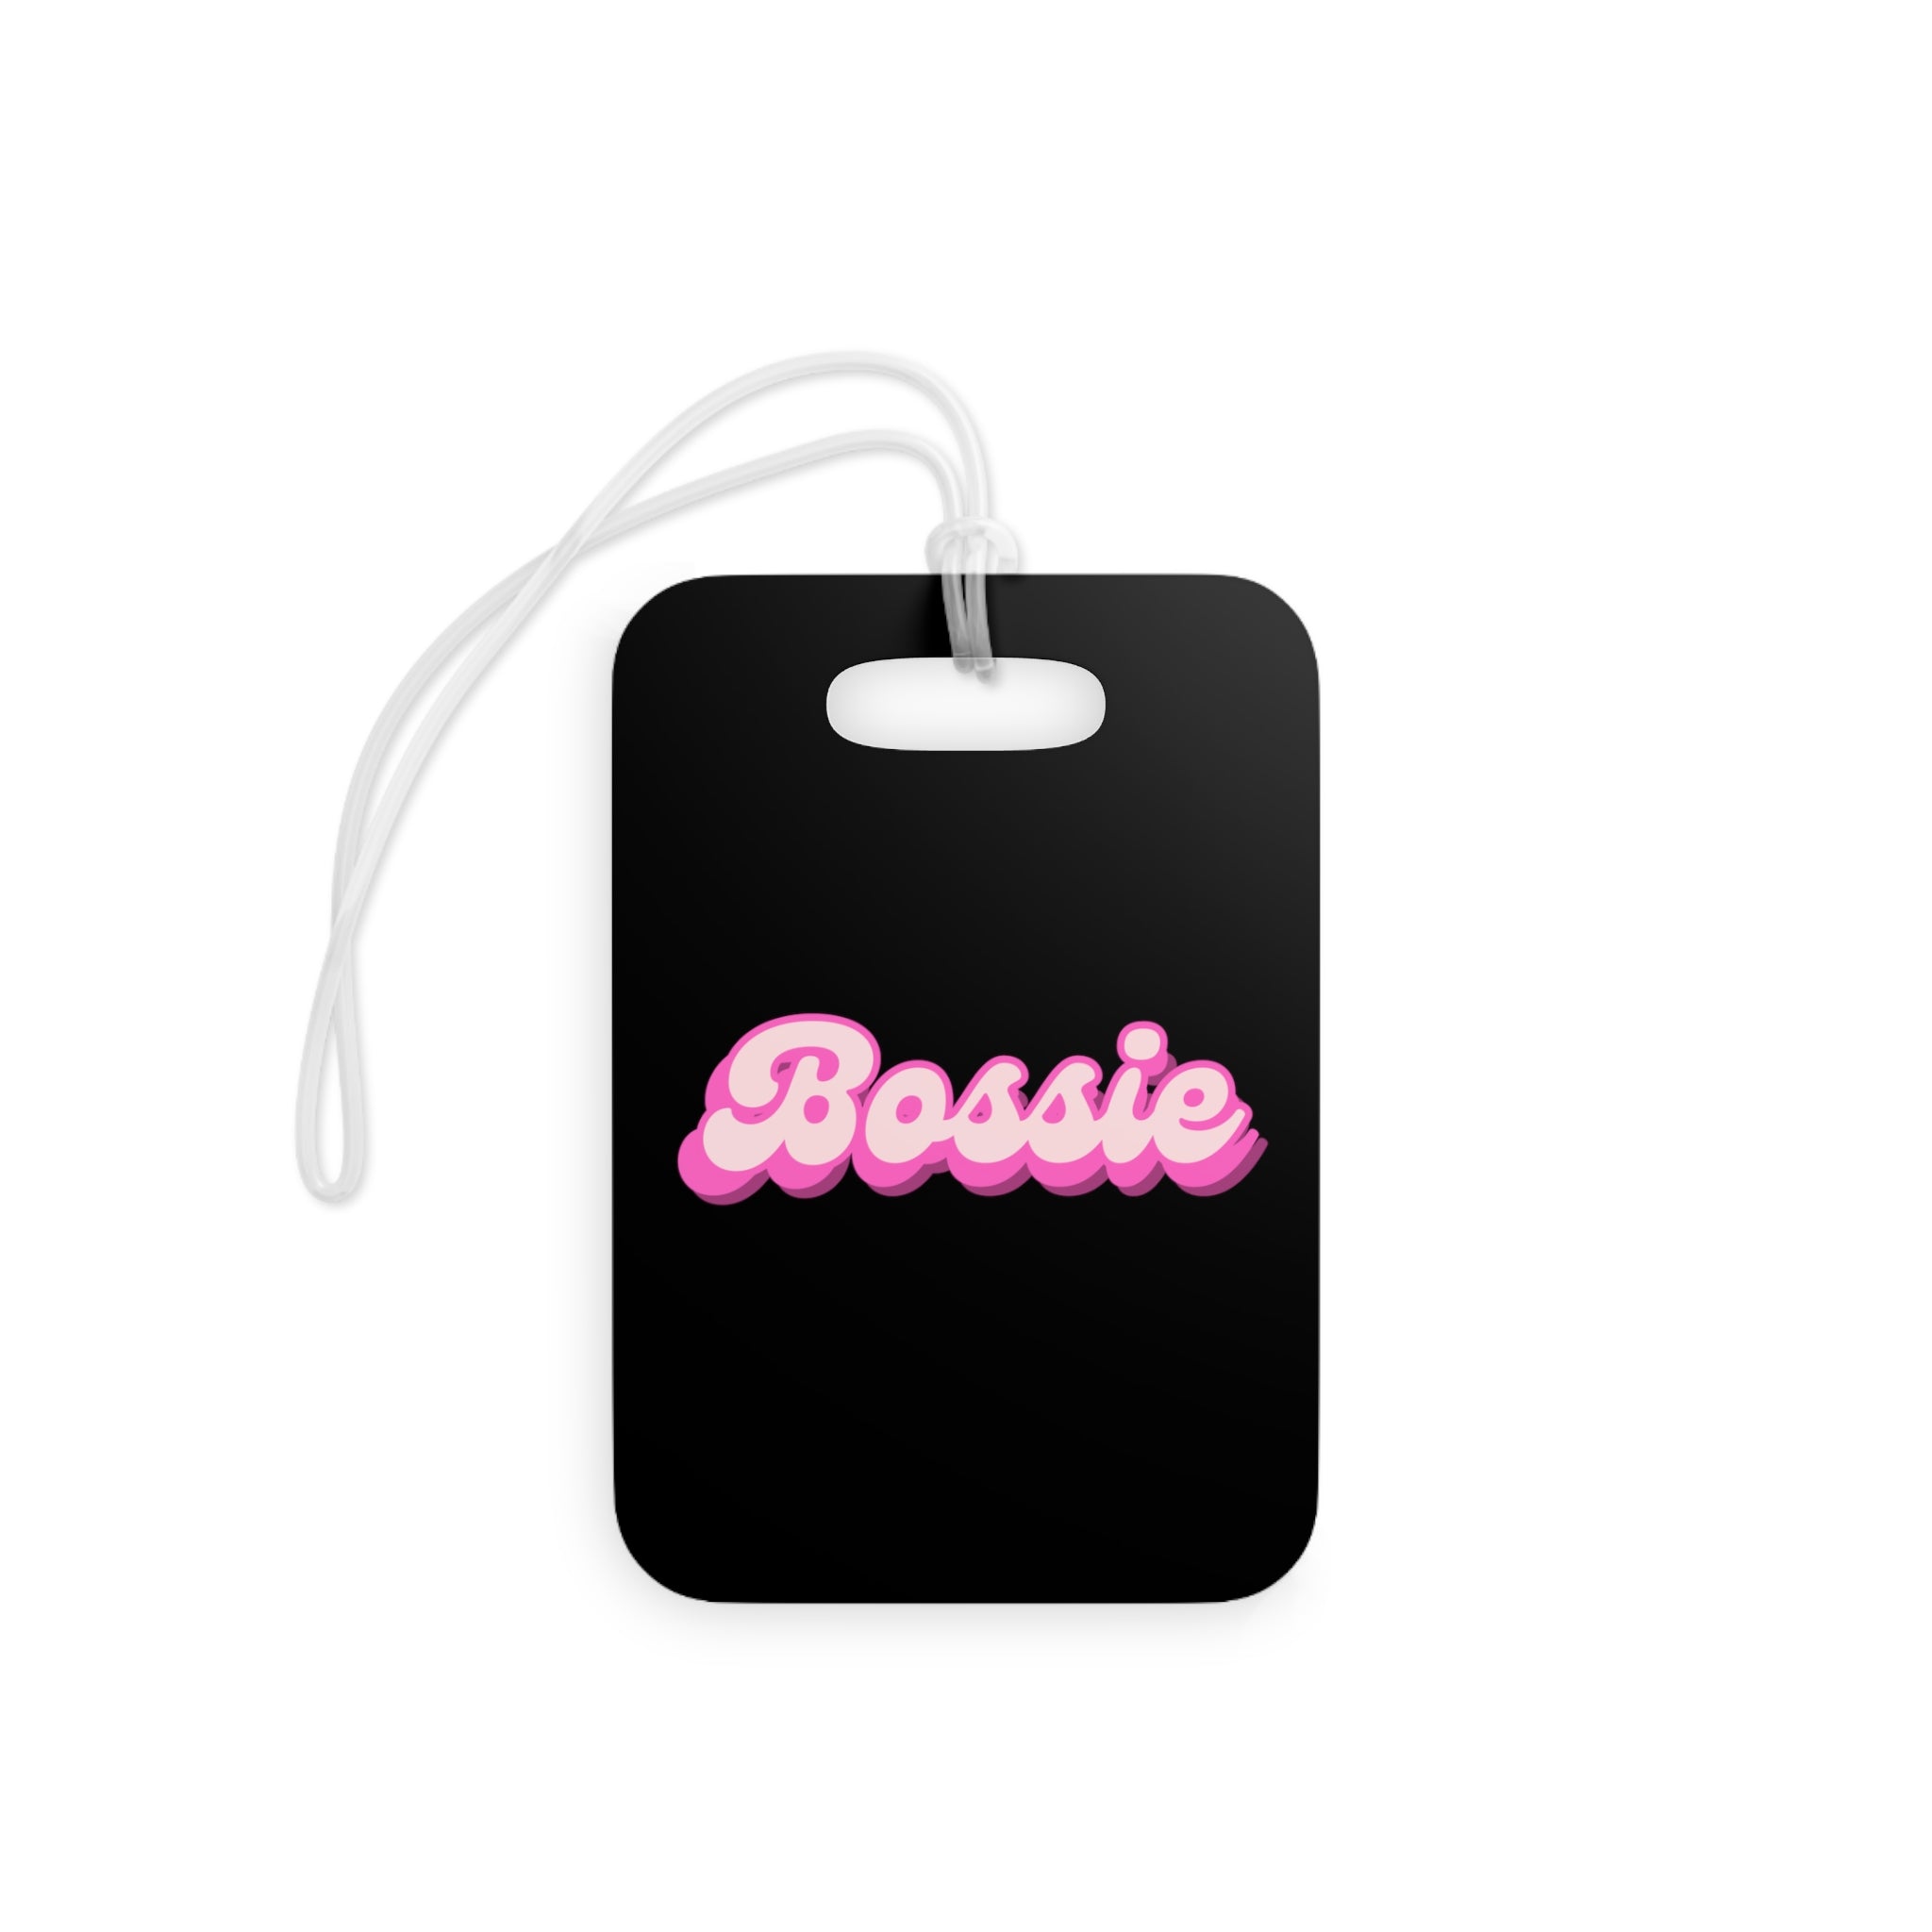  Bossie (Barbie) Funny Luggage Tag, Barbie Bag Tag, Funny Travel Lover Gift, Gift For Her AccessoriesRectangleOnesize